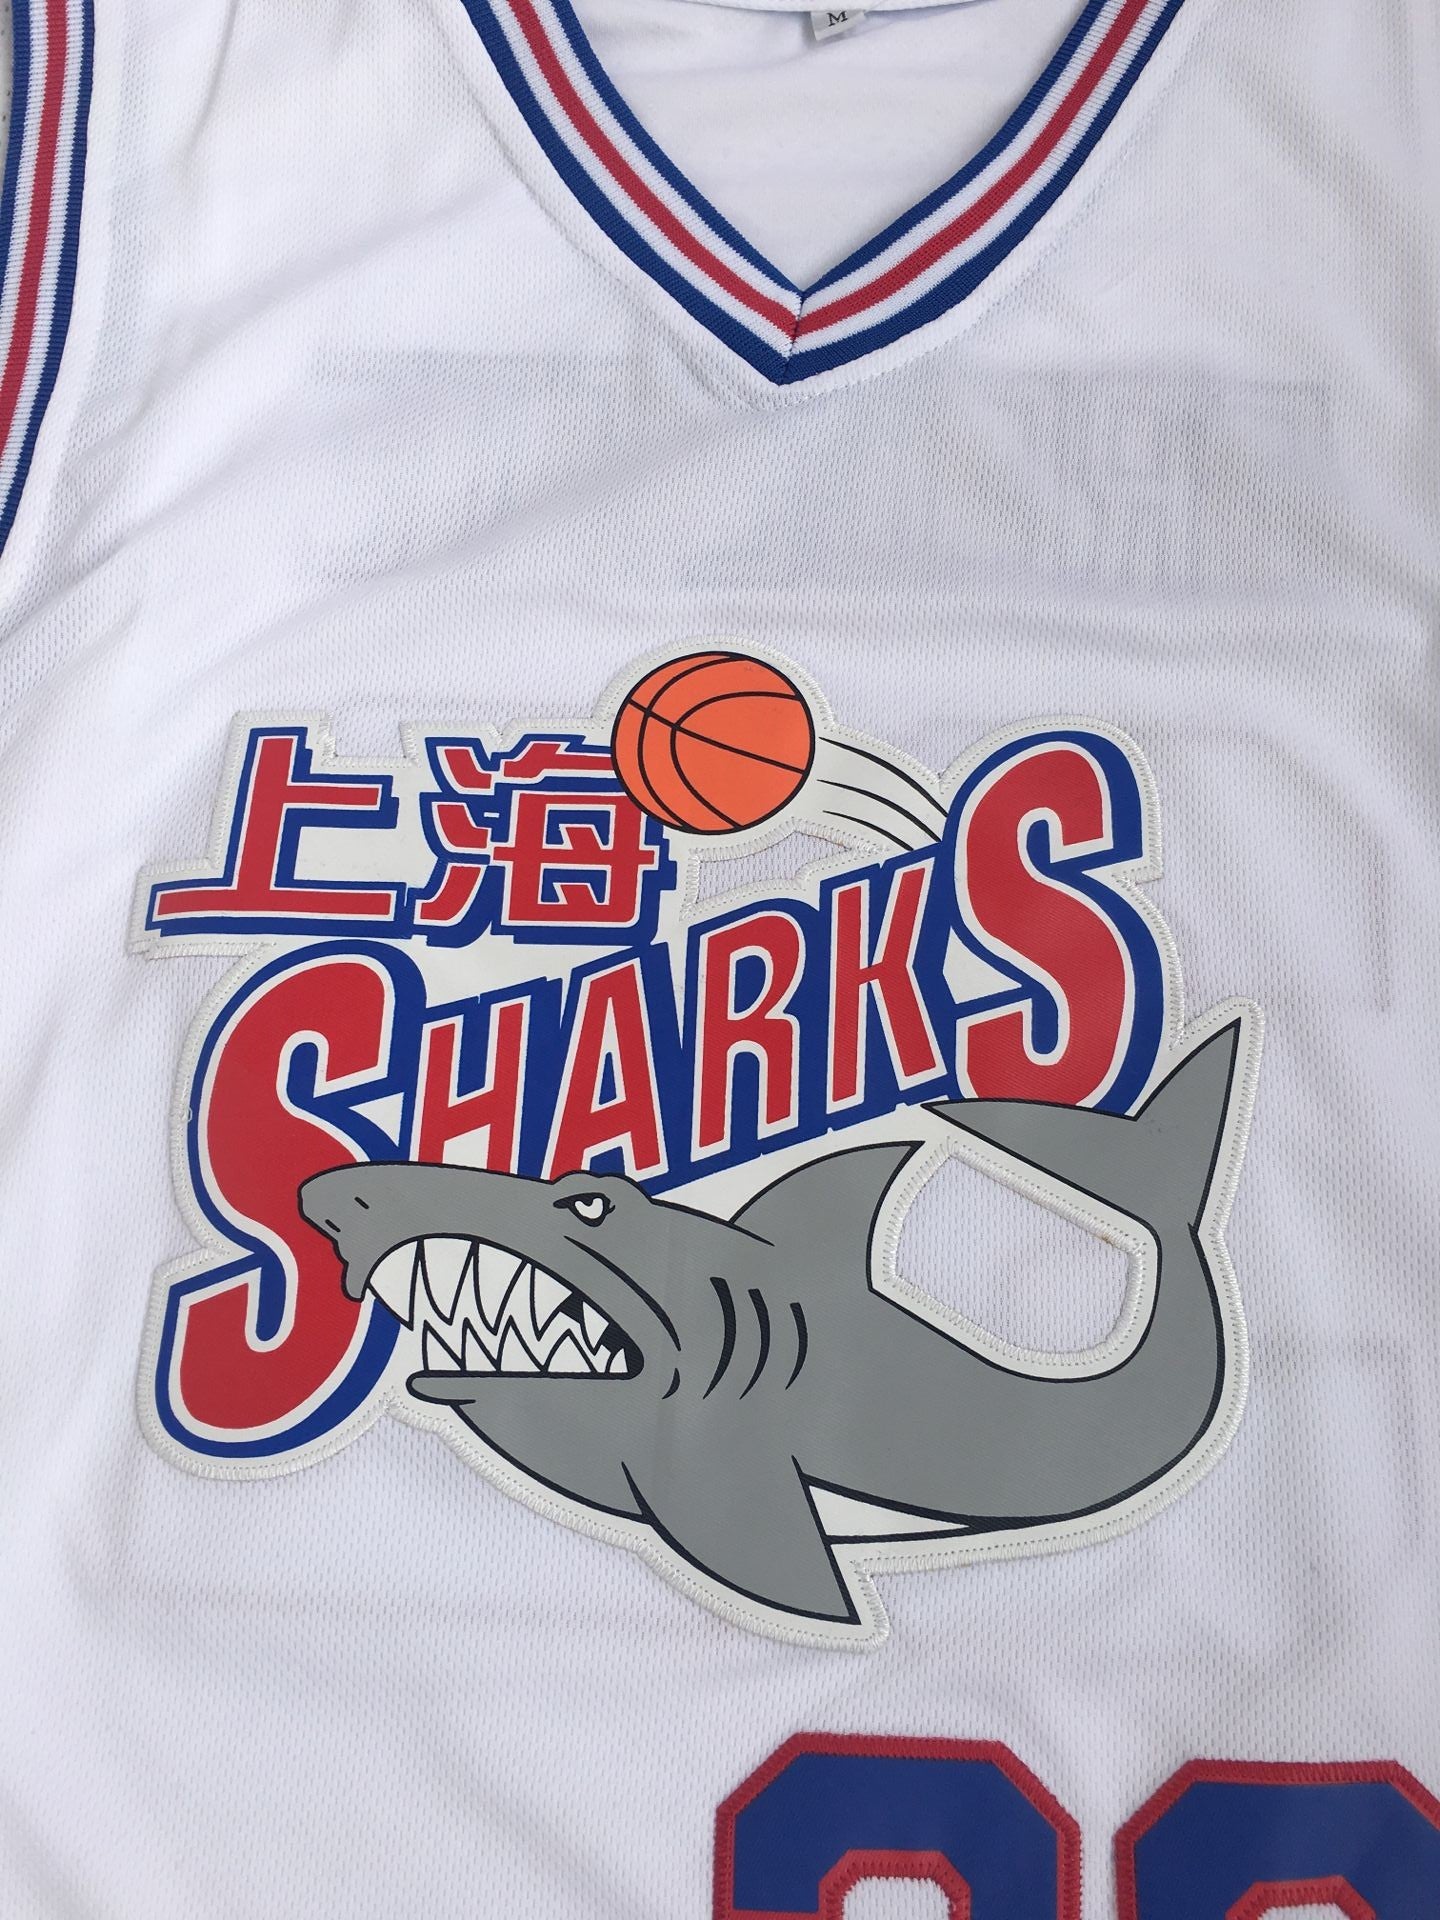 Shanghai team No. 32 Fredette white embroidered jersey